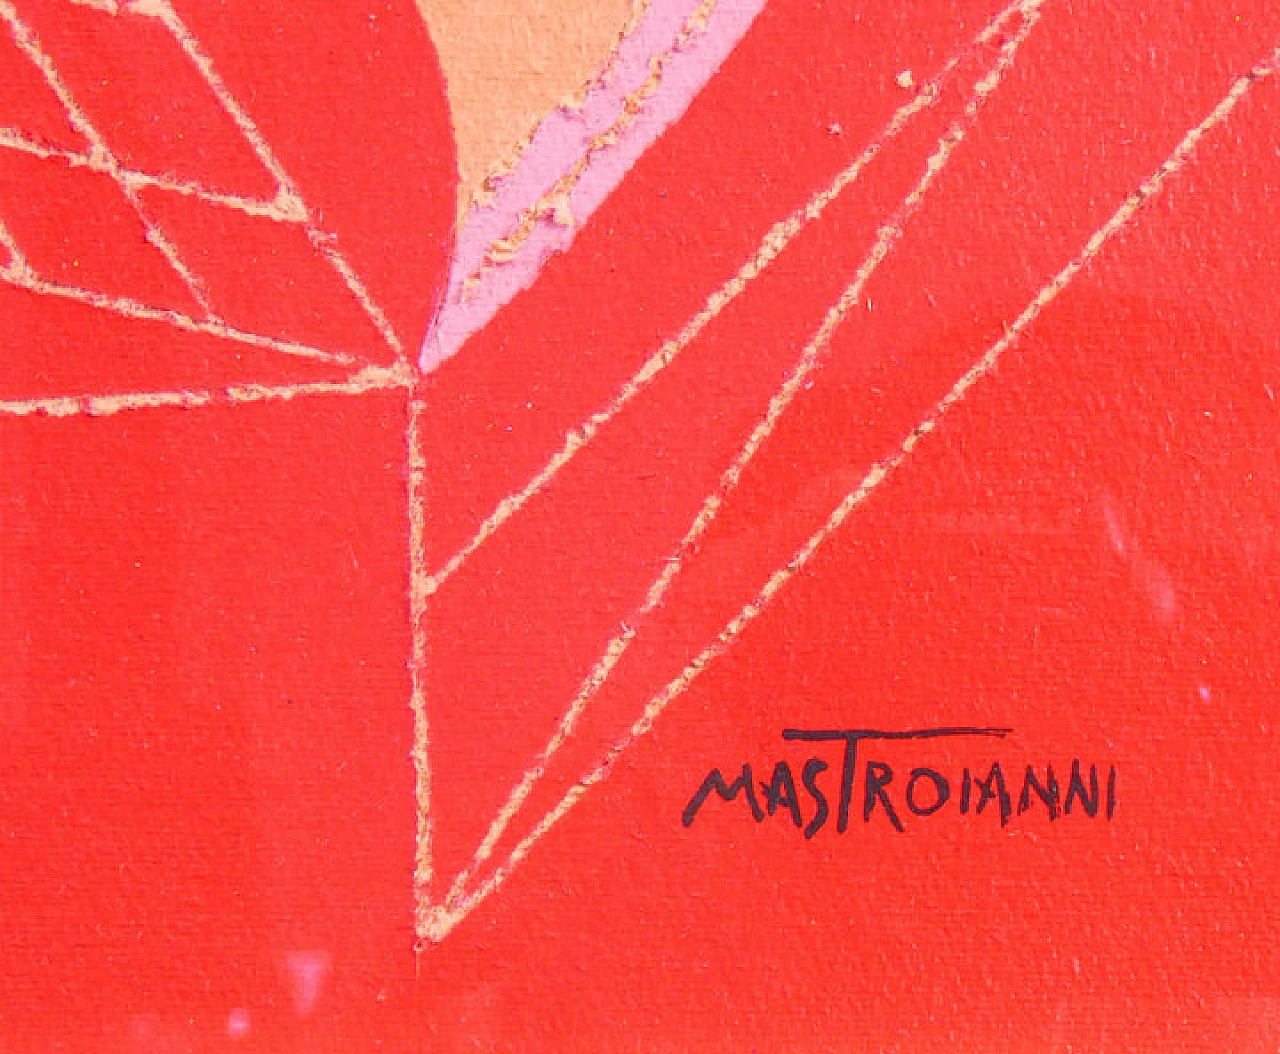 Mastroianni, abstract composition, mixed media painting, 1970s 9